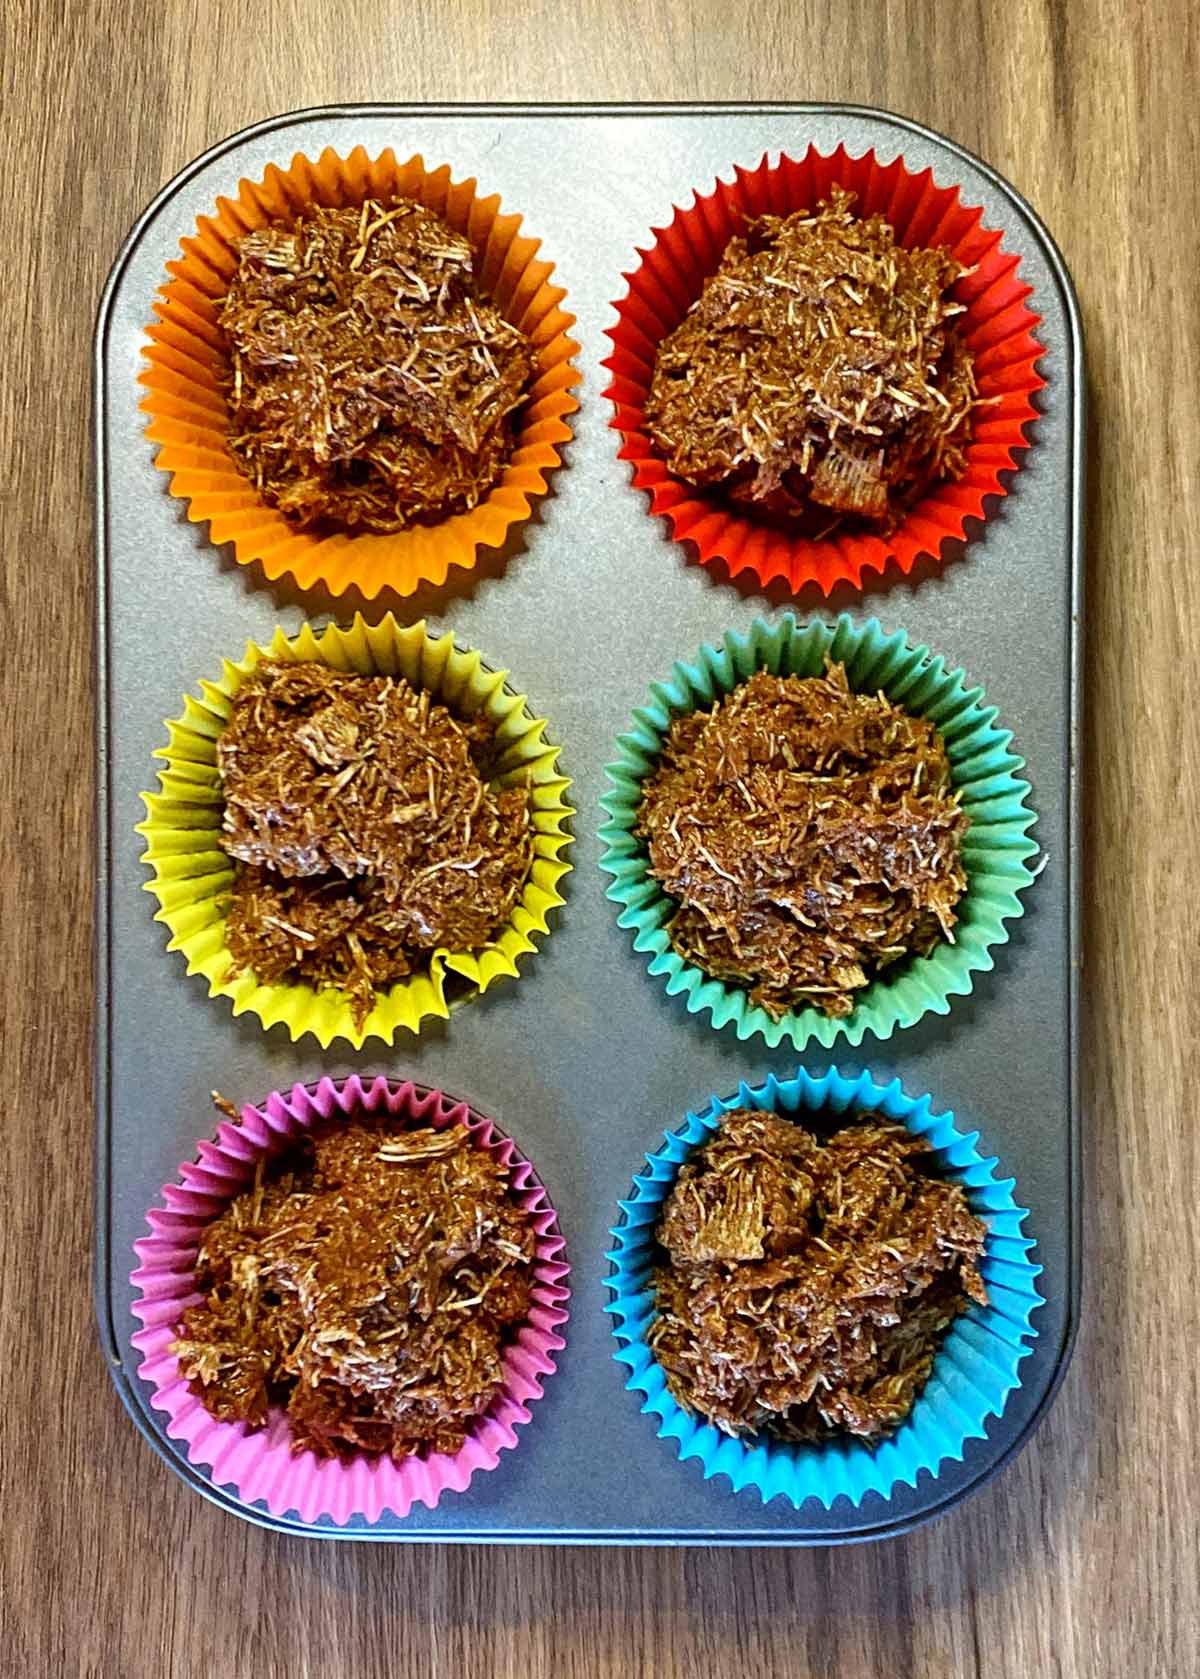 The chocolate shredded wheat pressed into six muffin cases.